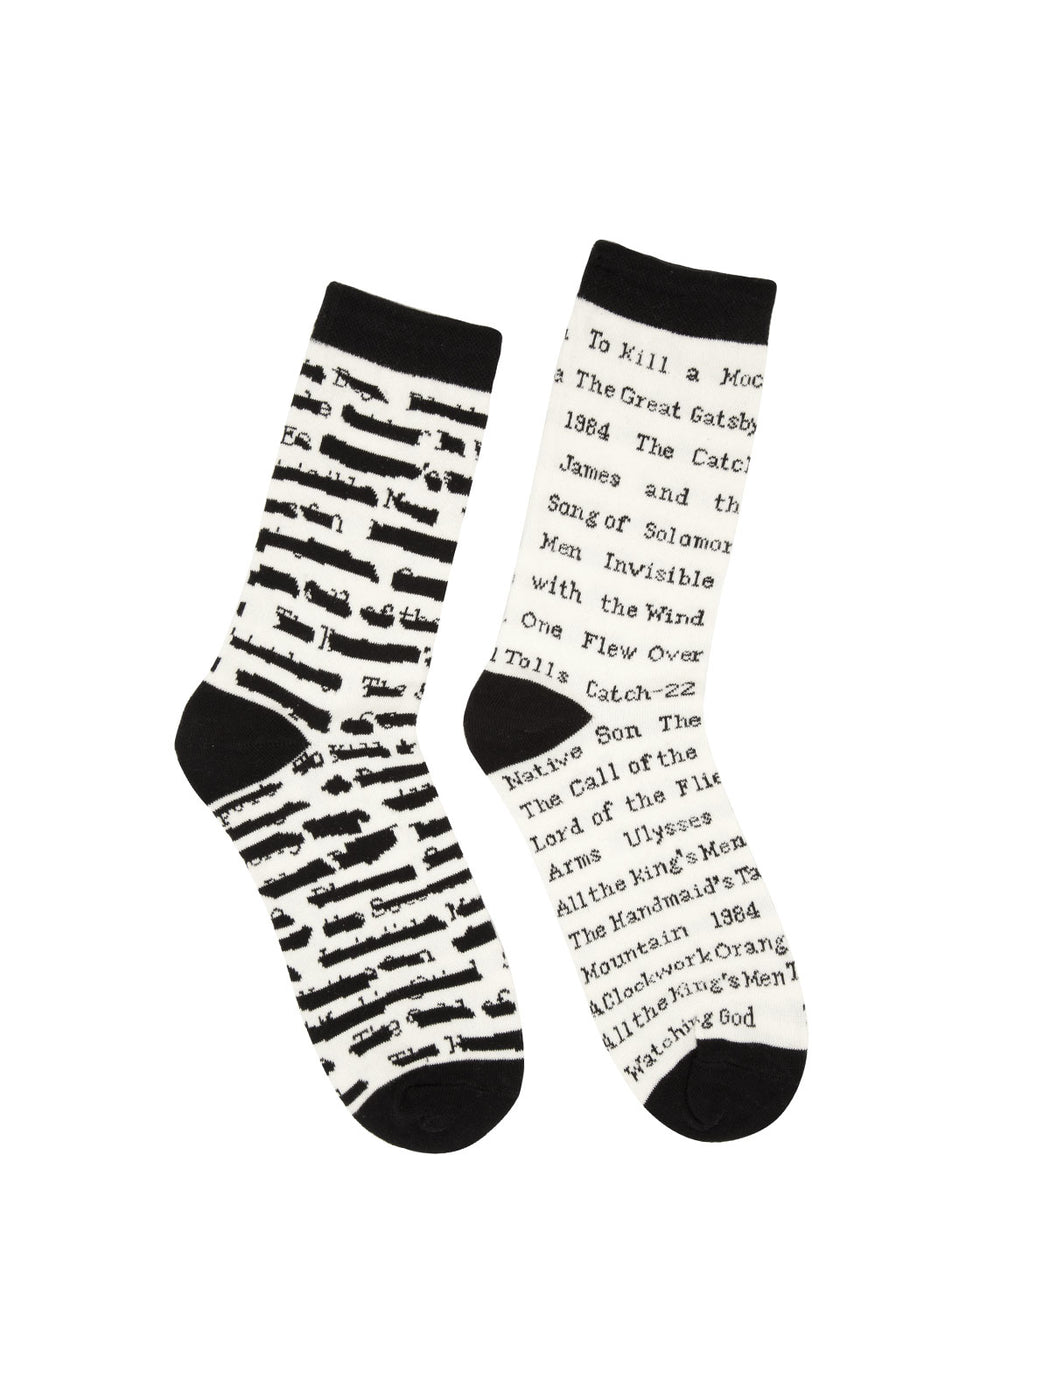 Banned Books literary socks — Out of Print